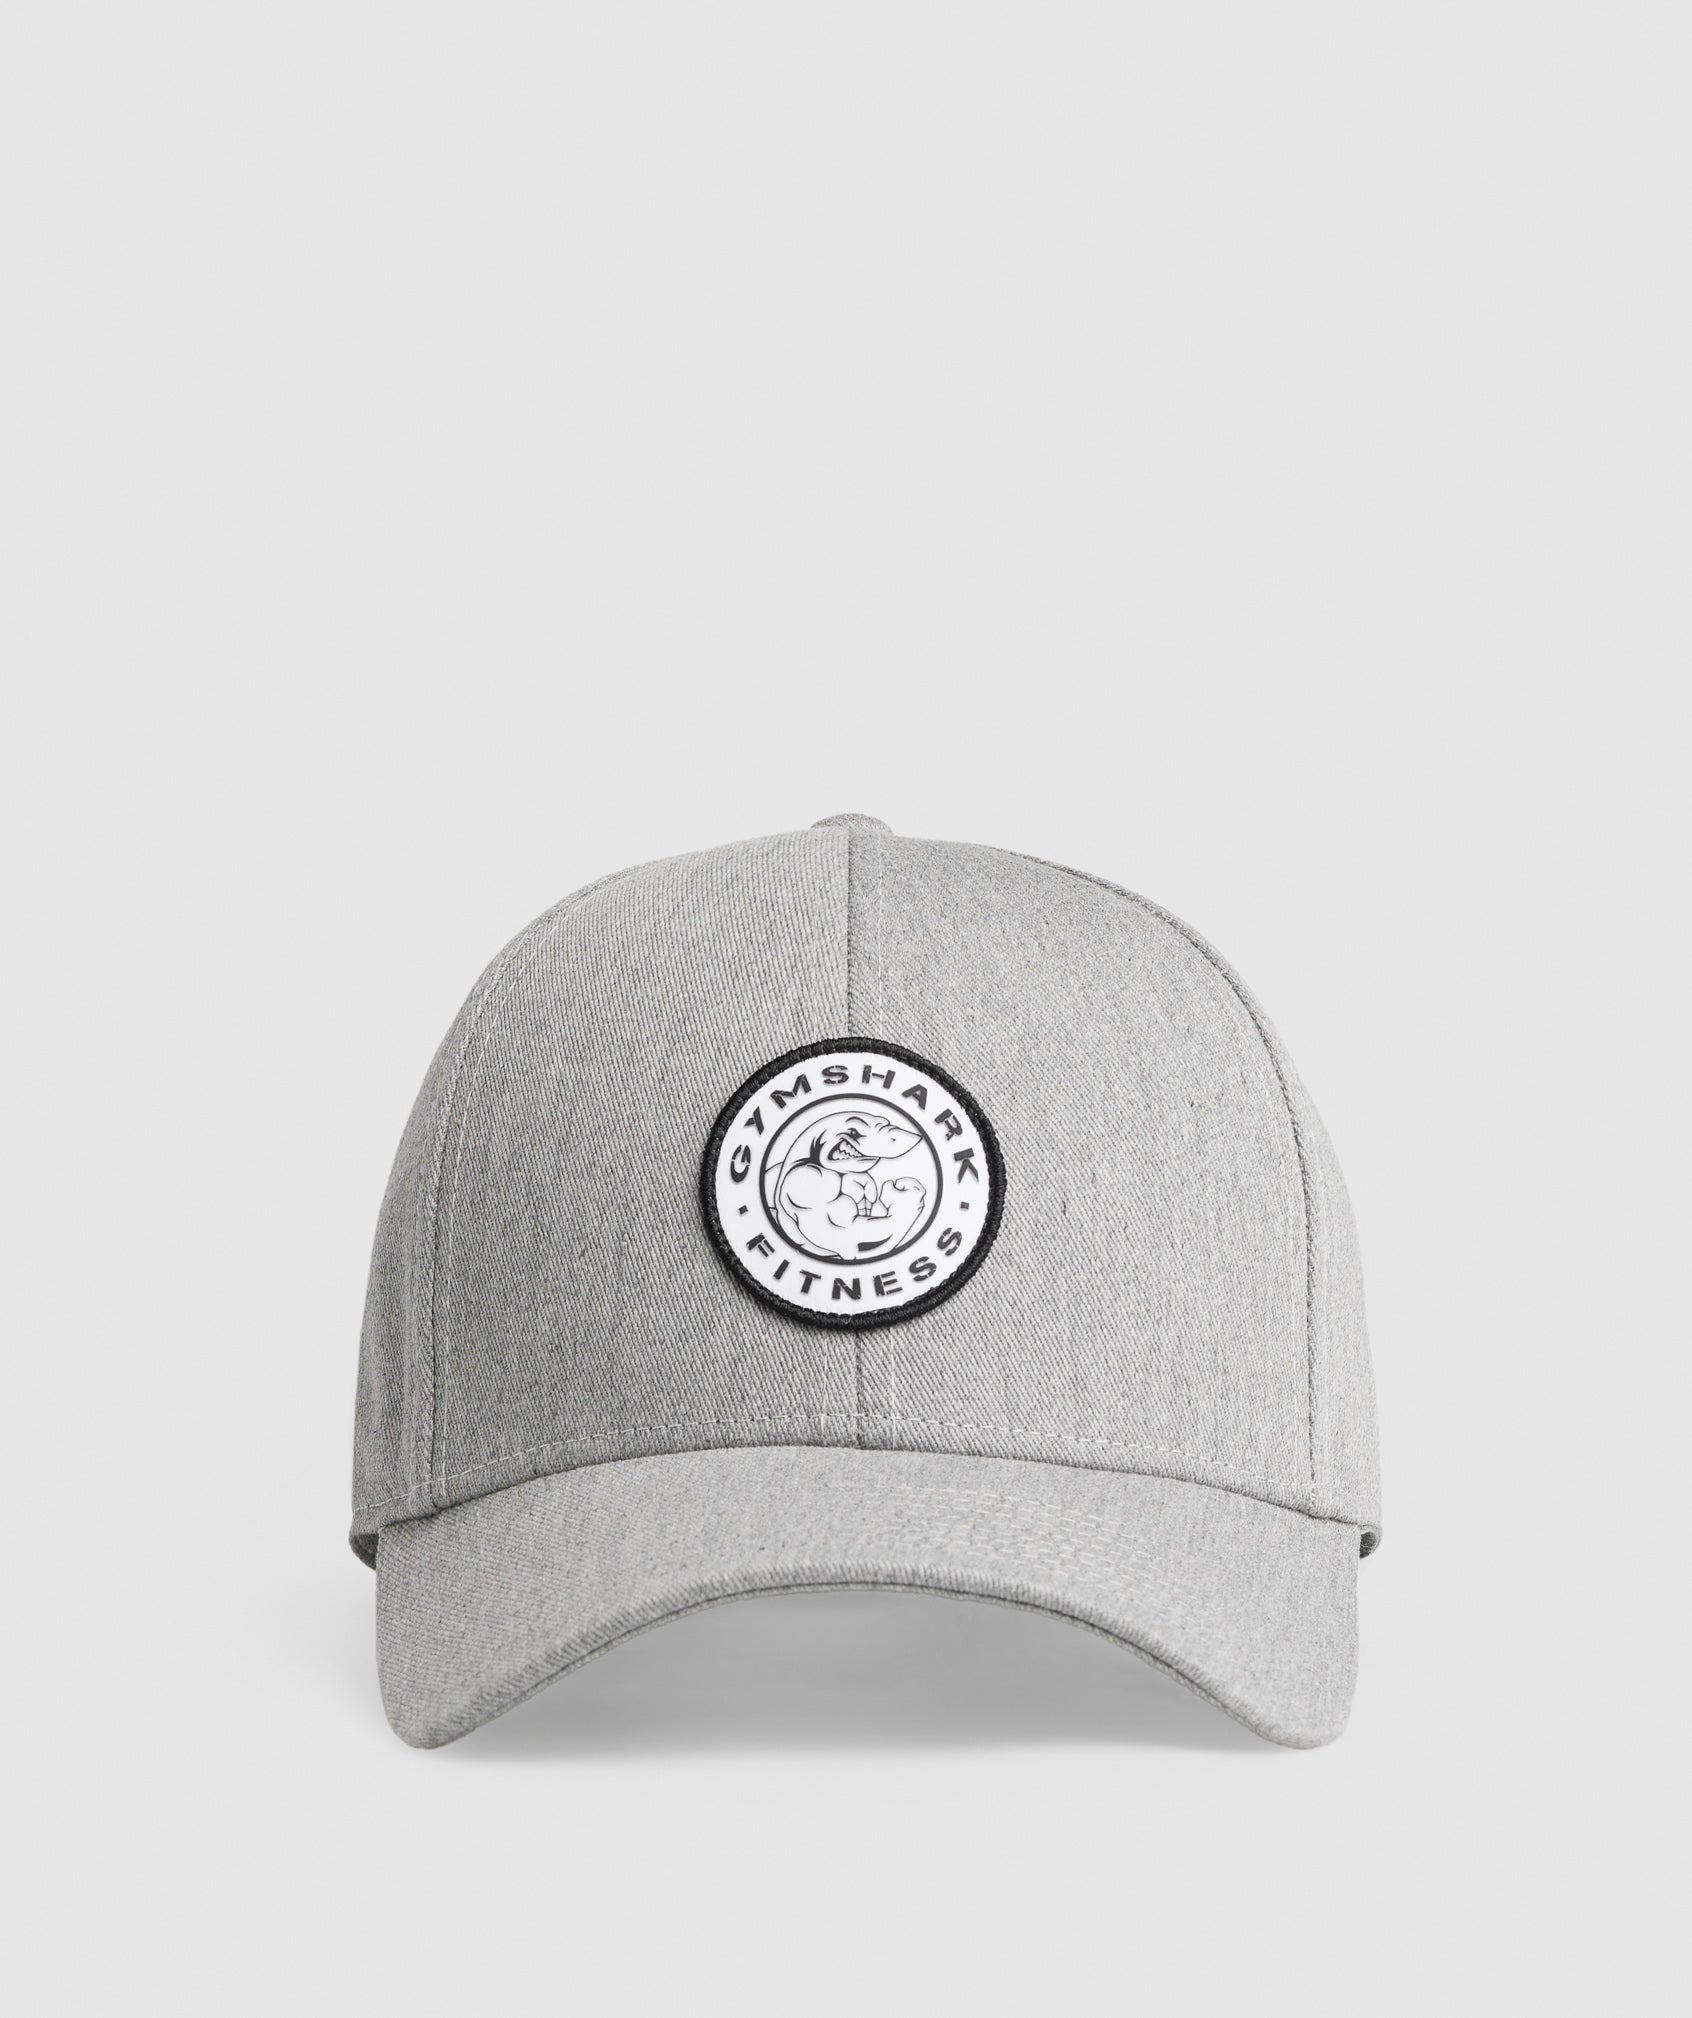 Legacy Cap in Light Grey Core Marl - view 1